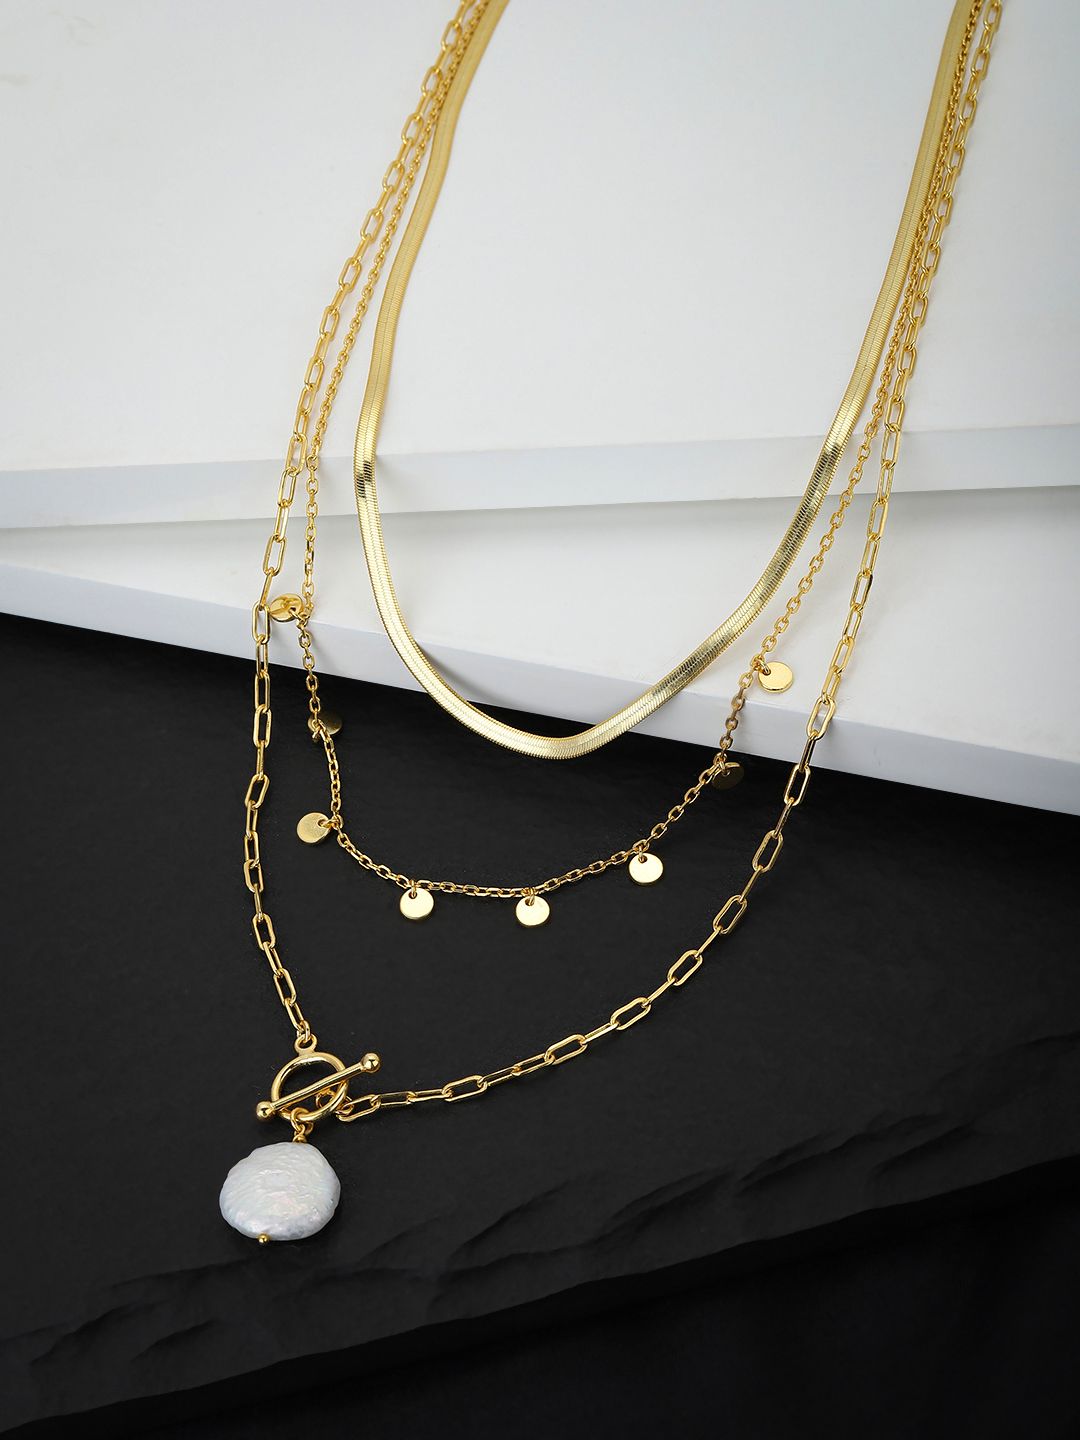 Carlton London Gold-Toned & White Brass Gold-Plated Layered Necklace Price in India